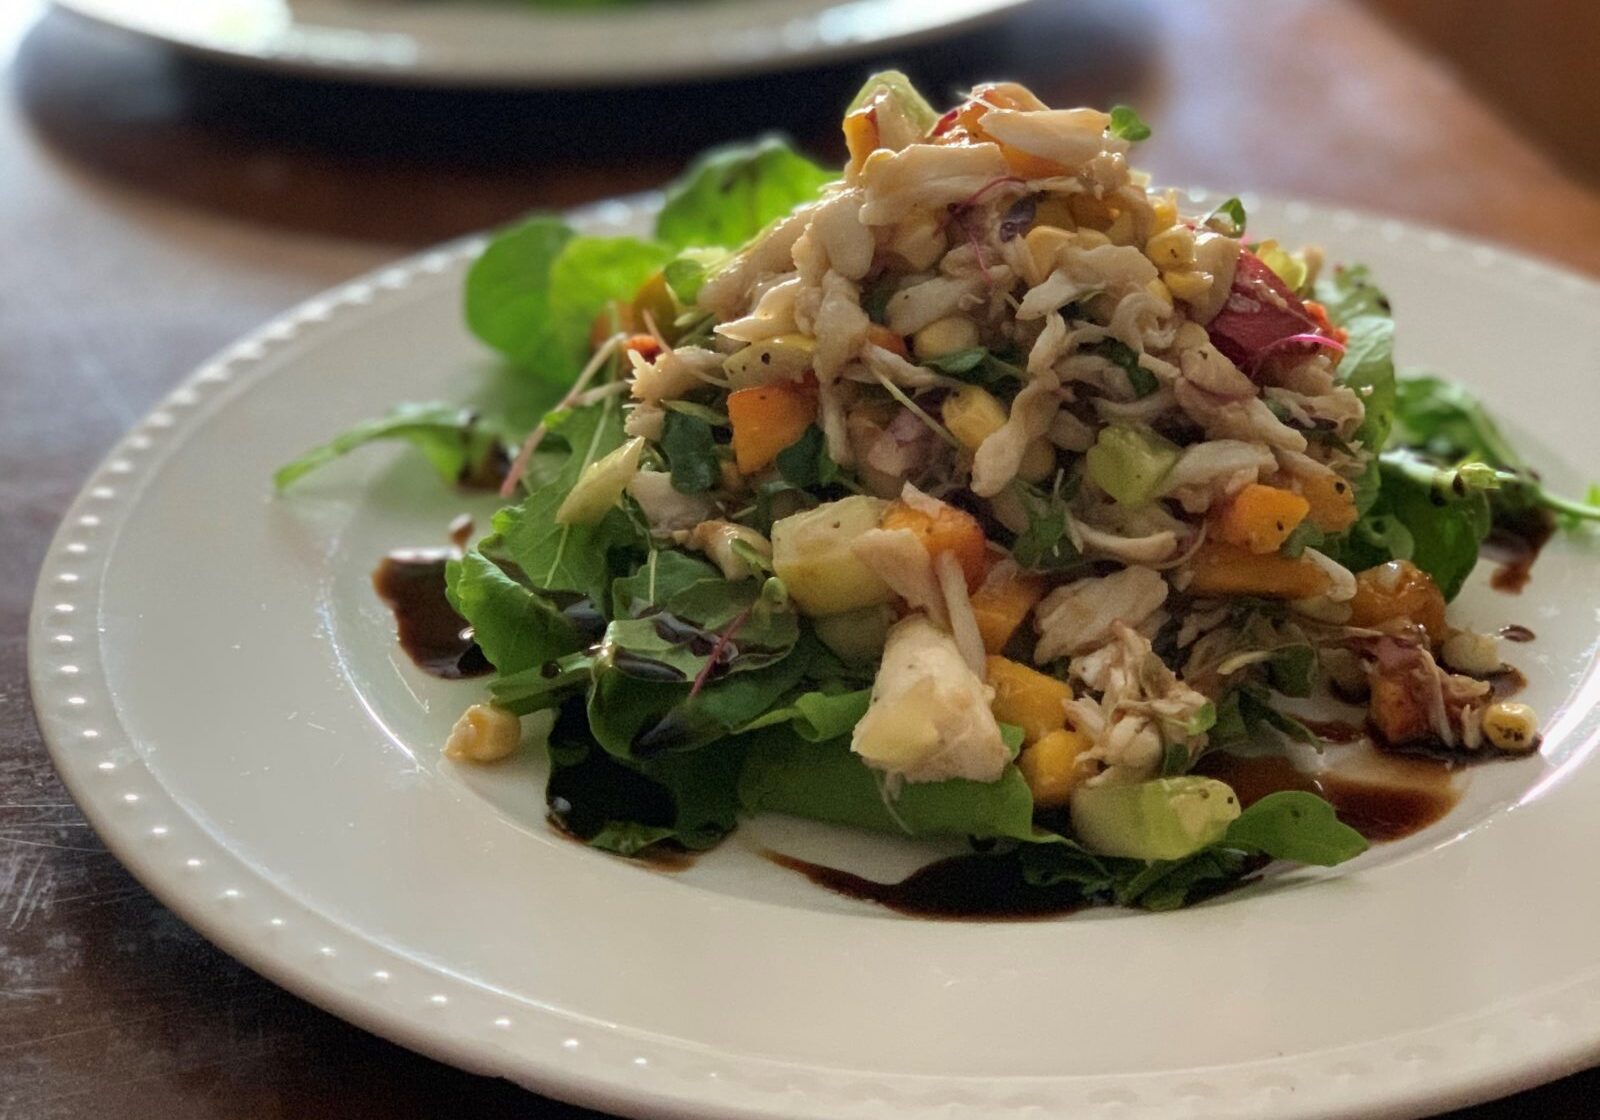 Summer Peach and Crab Relish over Market Greens- recipe